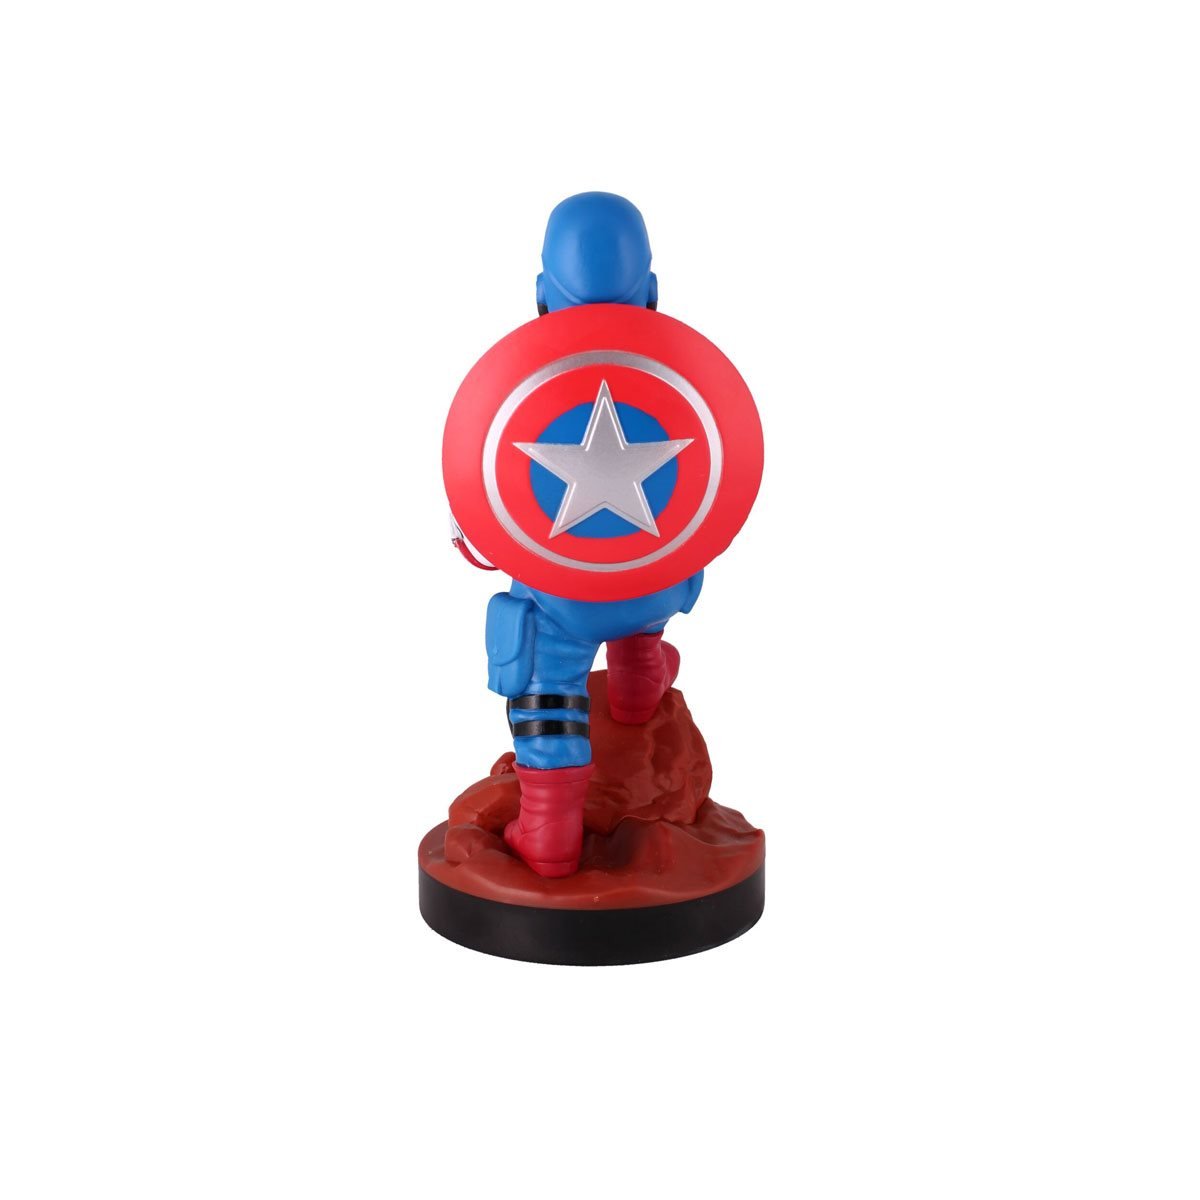 Avengers Captain America Cable Guy Controller Holder by Exquisite Gaming -Exquisite Gaming - India - www.superherotoystore.com